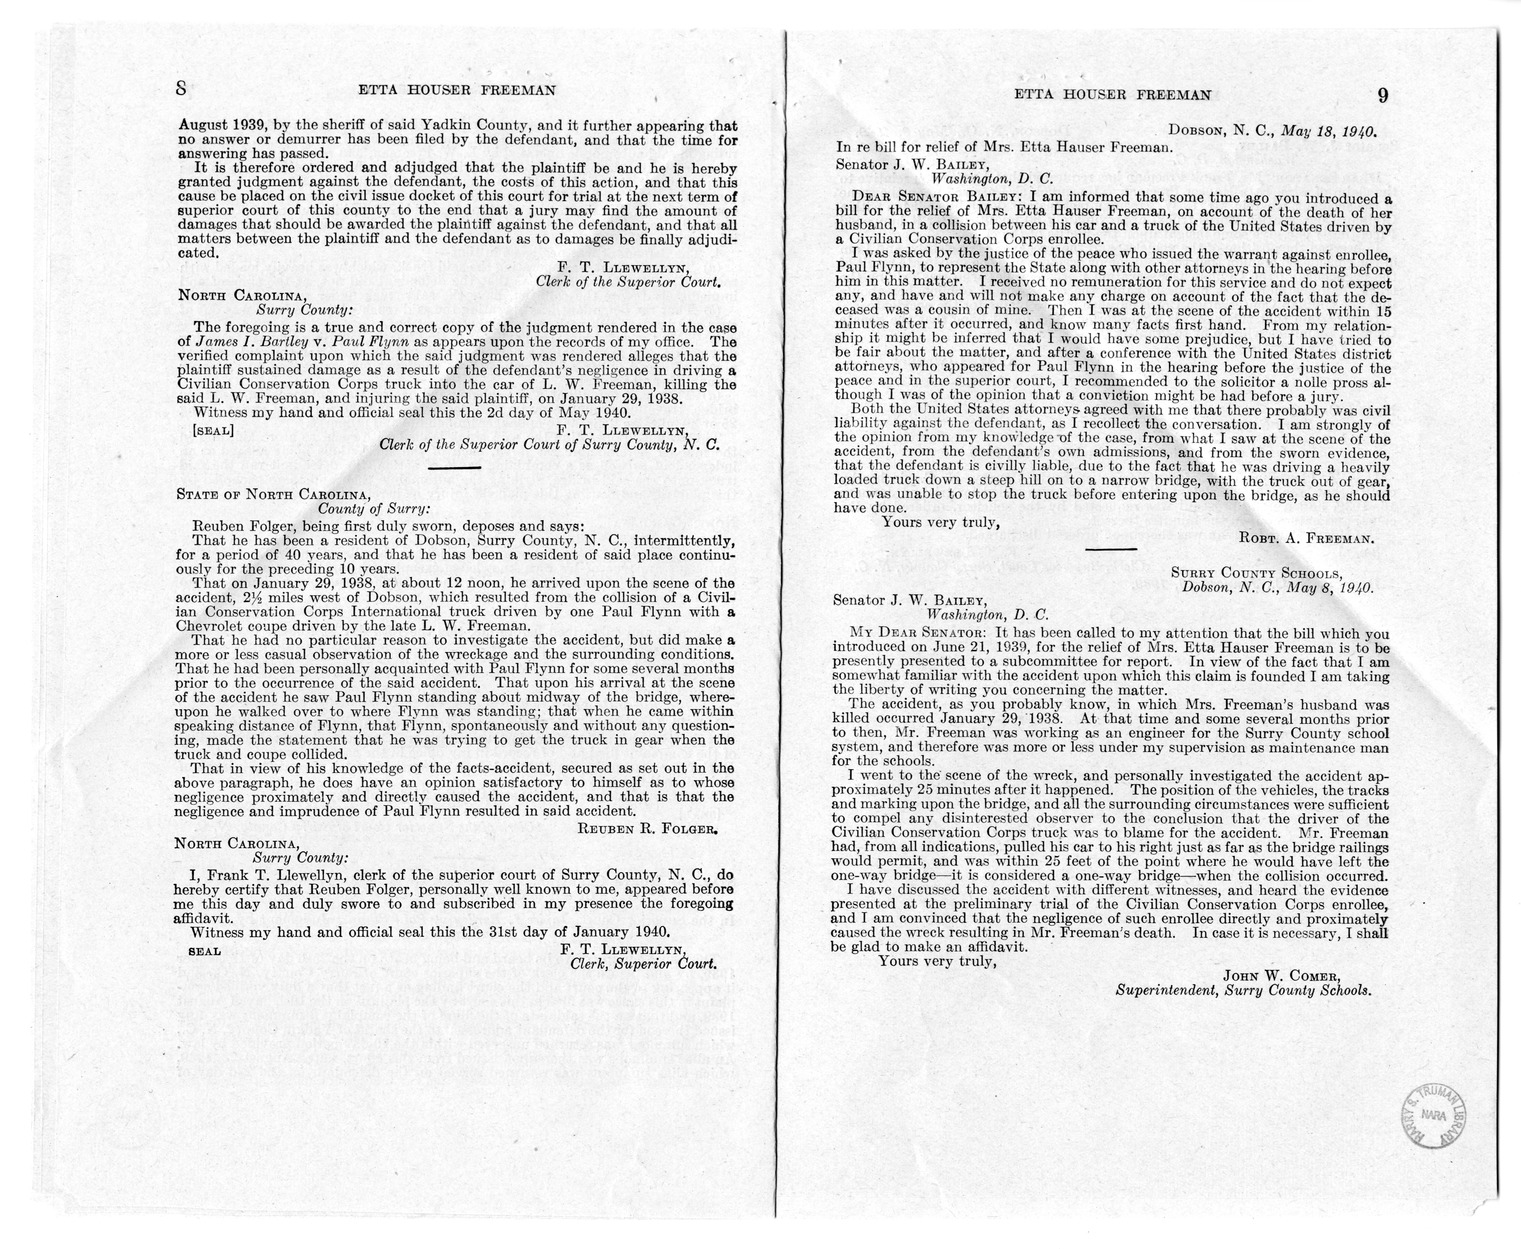 Memorandum from Frederick J. Bailey to M. C. Latta, S. 1199, Conferring Jurisdiction Upon the United States District Court for the Middle District of North Carolina to Hear, Determine, and Render Judgment Upon Any Claim Arising Out of the Death of L. W. Freeman, with Attachments